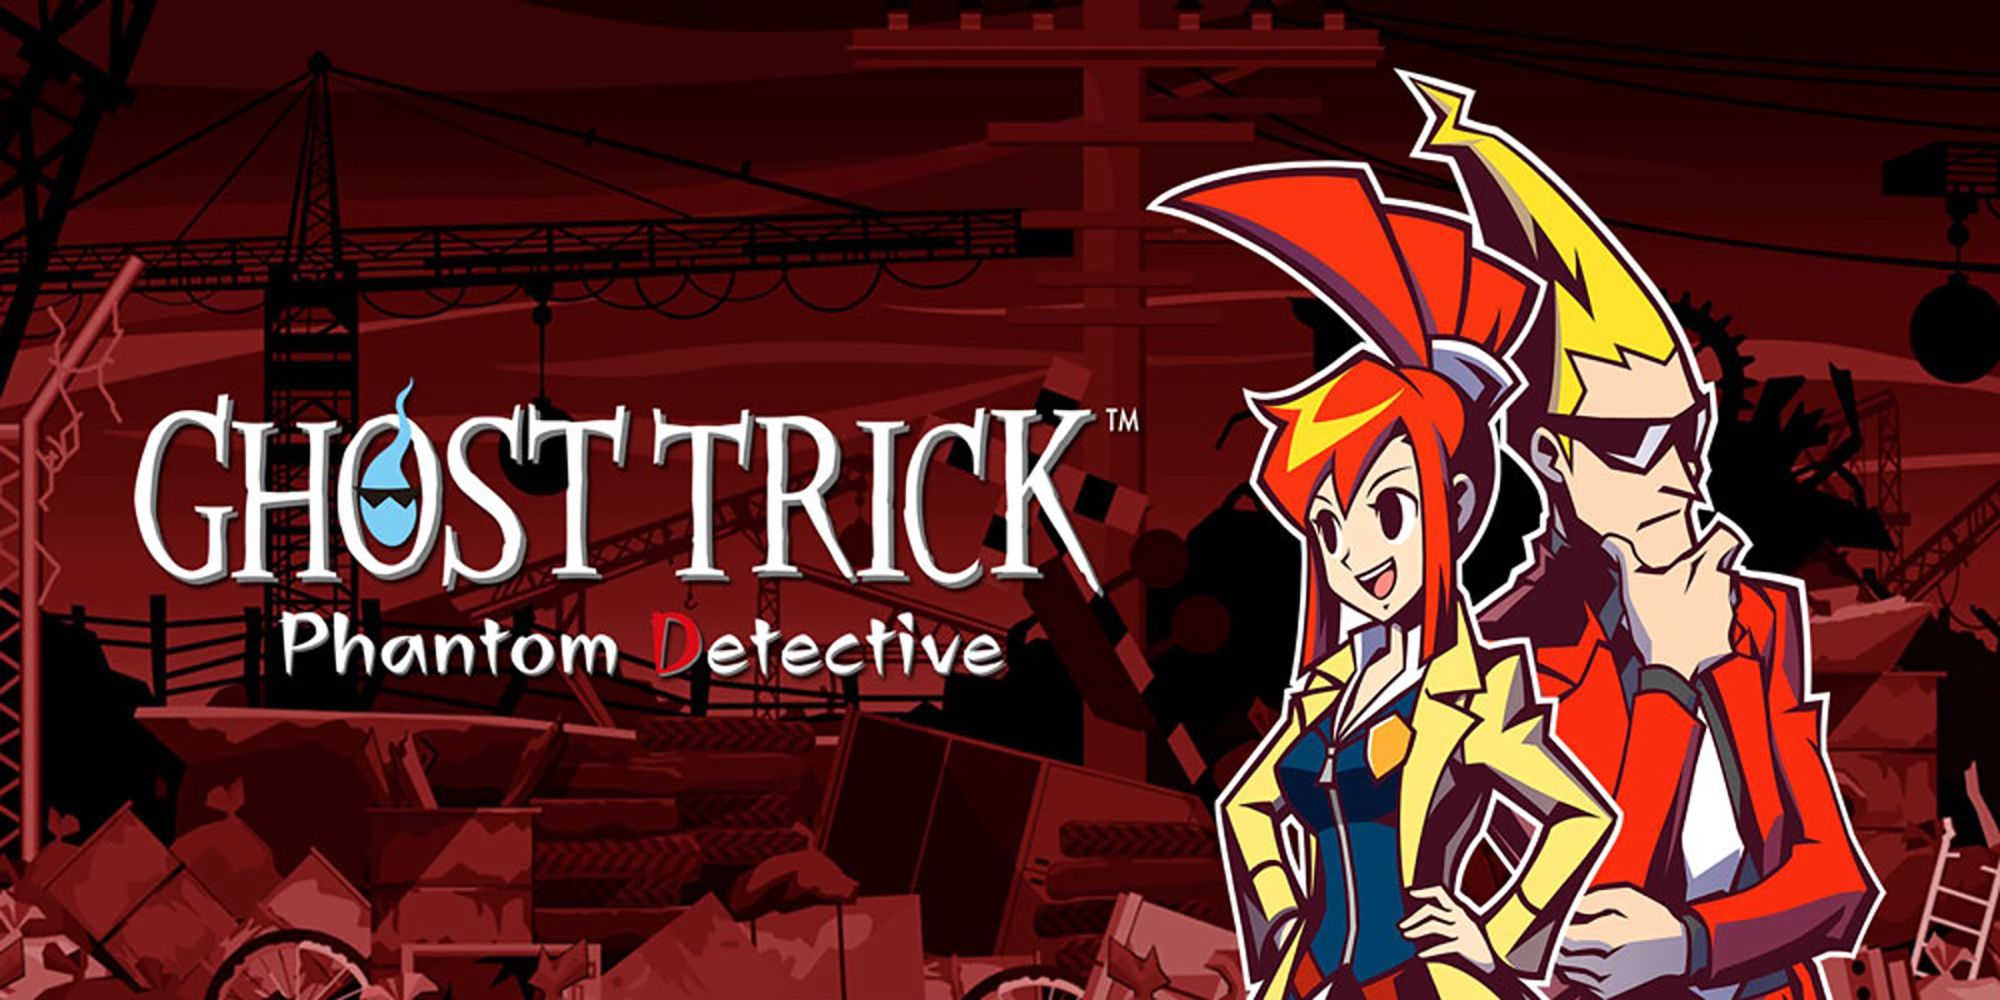 A Poster For Ghost Trick: Phantom Detective